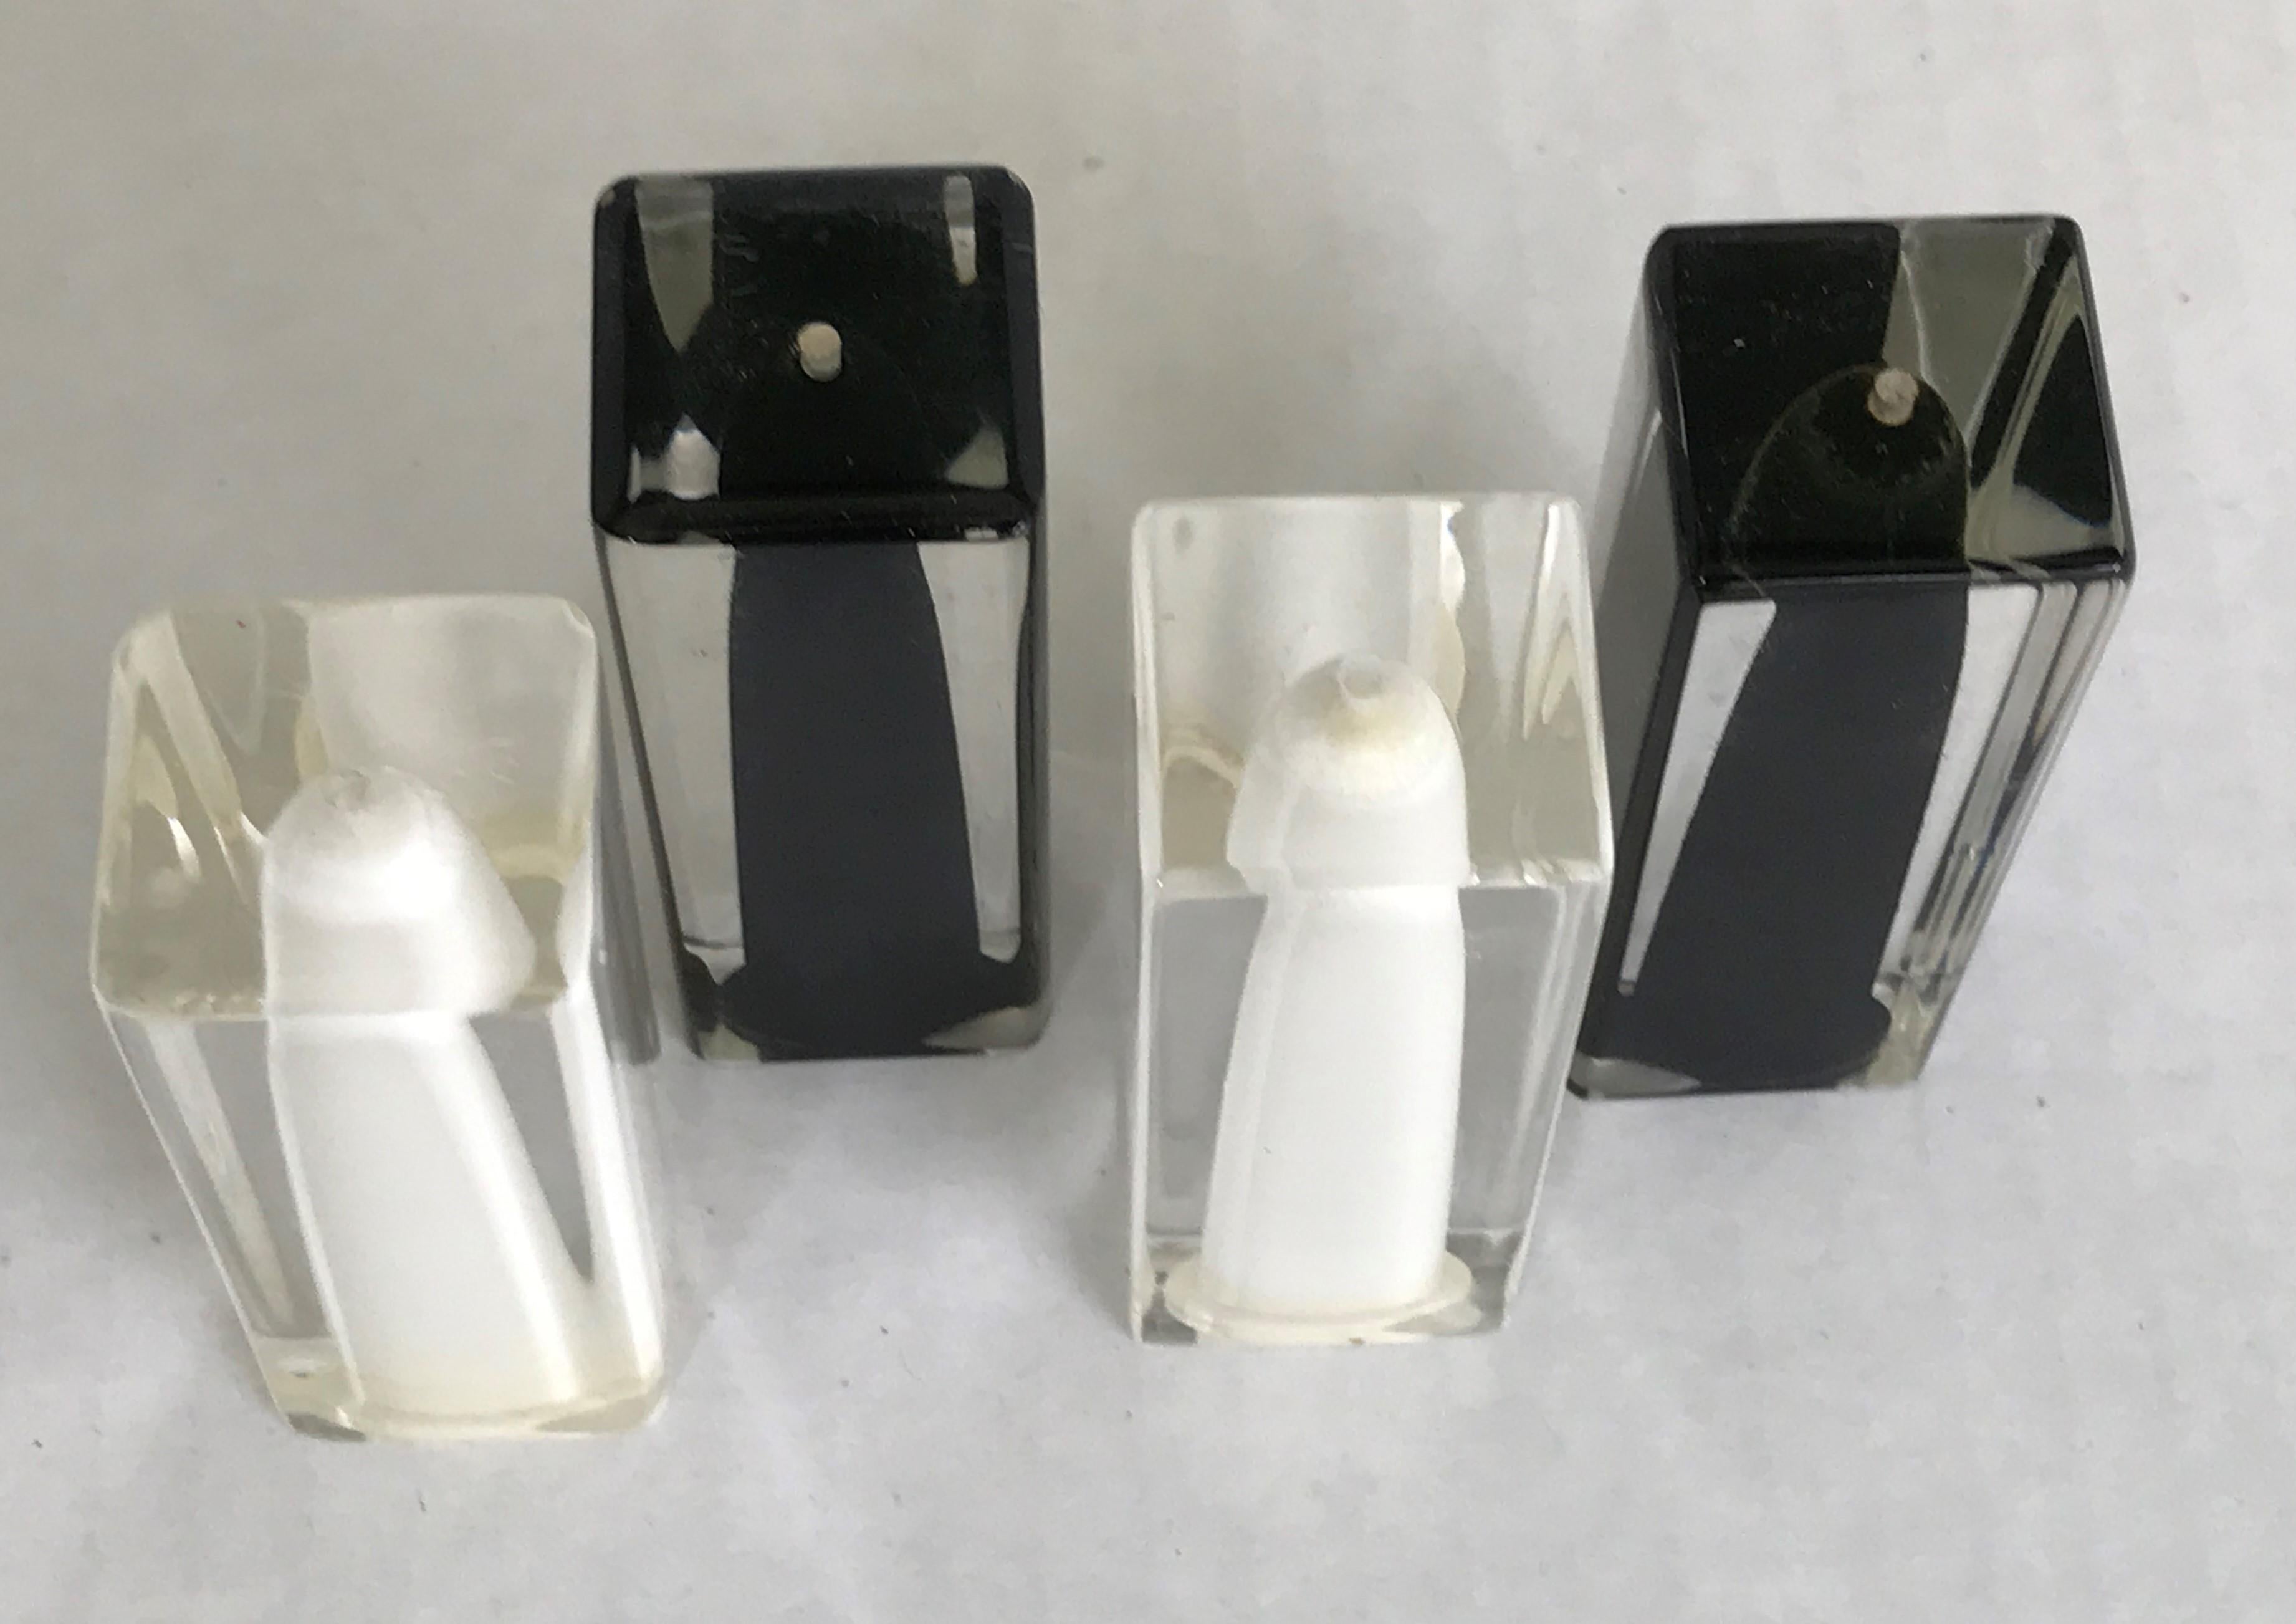 Two pairs of midcentury glam thick clear Lucite with black or white insides salt and pepper shakers by Fratelli Guzzini, Italy from the 1970s. All in very good condition just minor age wear, no issues. Swanky and modern sleek. Two Salts and two